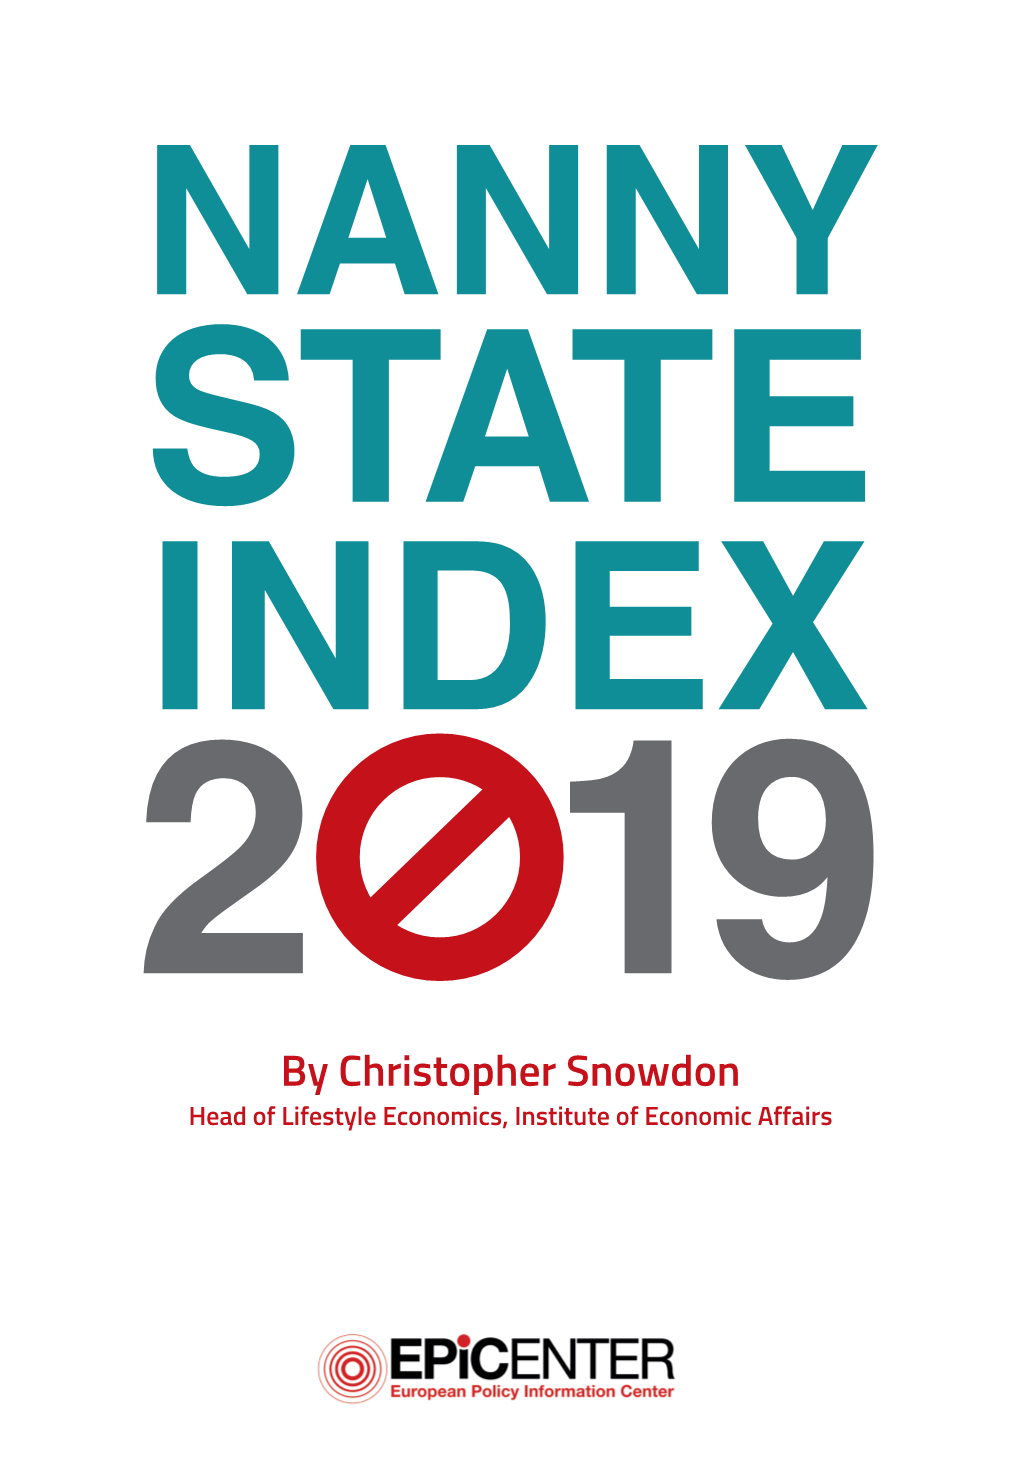 2019 Epicenter Nanny State Index, a League Table of the Best and Worst Places in the European Union to Eat, Drink, Smoke and Vape